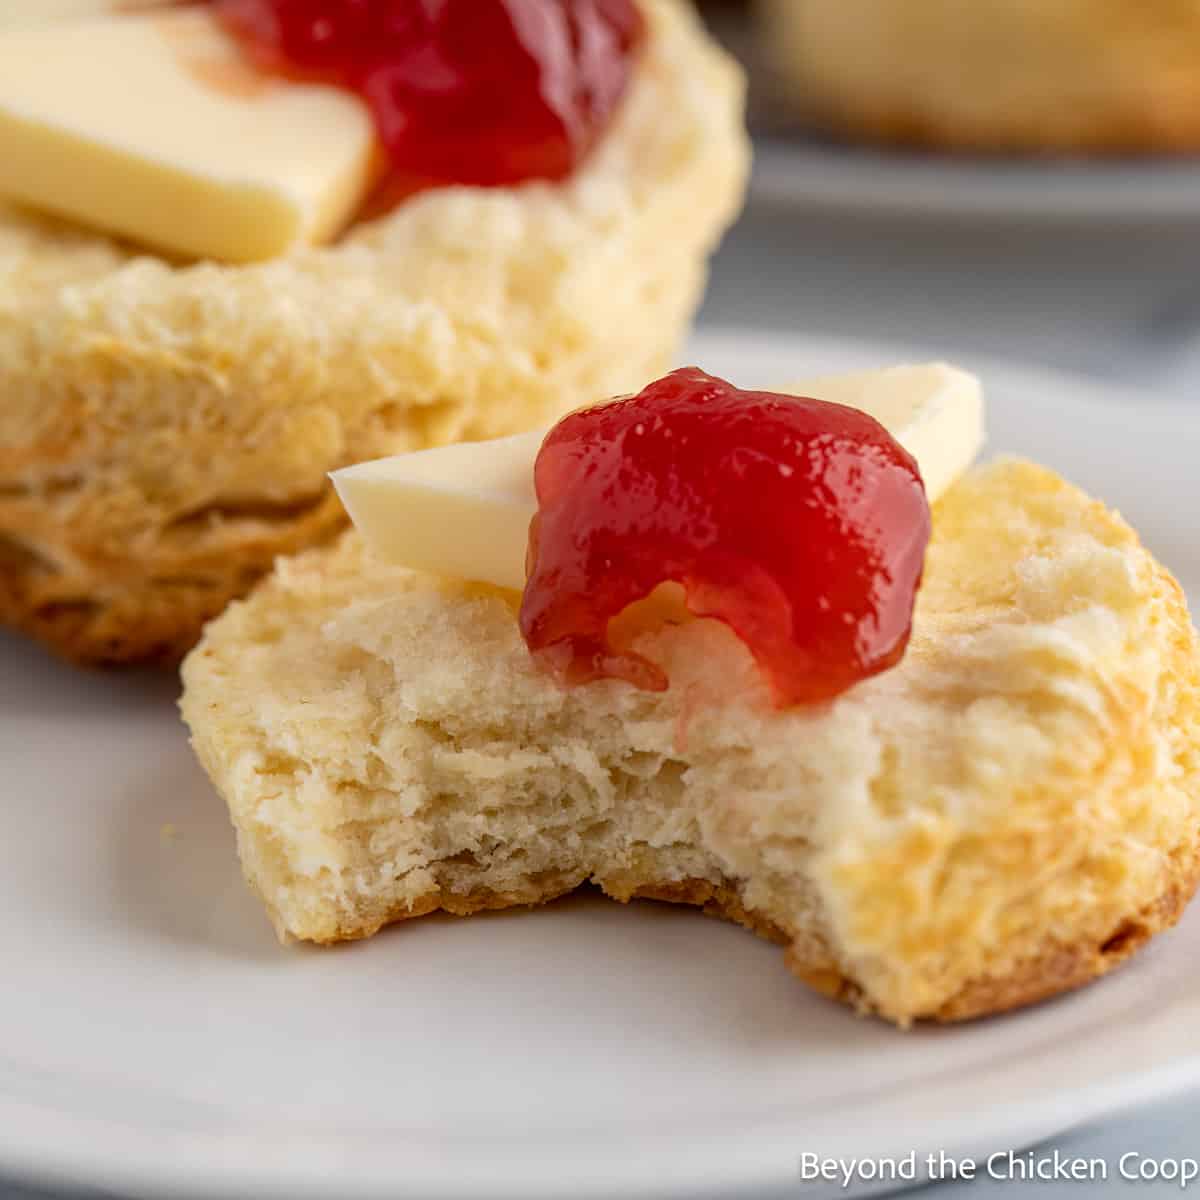 Half of a biscuit topped with butter and jam.